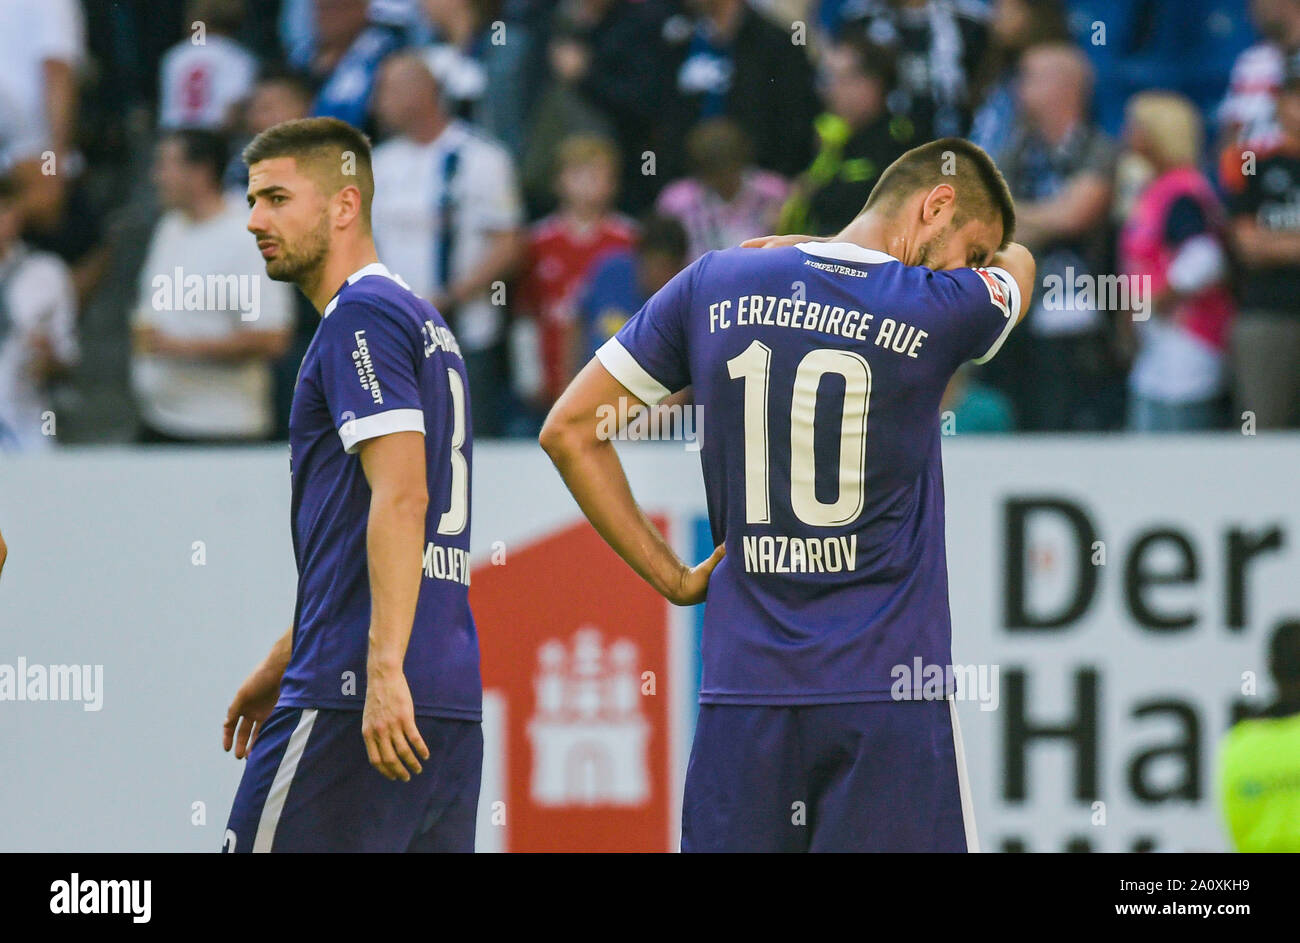 Hamburg, Germany. 22nd Sep, 2019. Soccer: 2nd Bundesliga, Hamburger SV - Erzgebirge Aue, 7th matchday. Aues Tom Baumgart (l) and Aues Dimitrij Nazarov stand on the square after the final whistle. Credit: Axel Heimken/dpa - IMPORTANT NOTE: In accordance with the requirements of the DFL Deutsche Fußball Liga or the DFB Deutscher Fußball-Bund, it is prohibited to use or have used photographs taken in the stadium and/or the match in the form of sequence images and/or video-like photo sequences./dpa/Alamy Live News Stock Photo